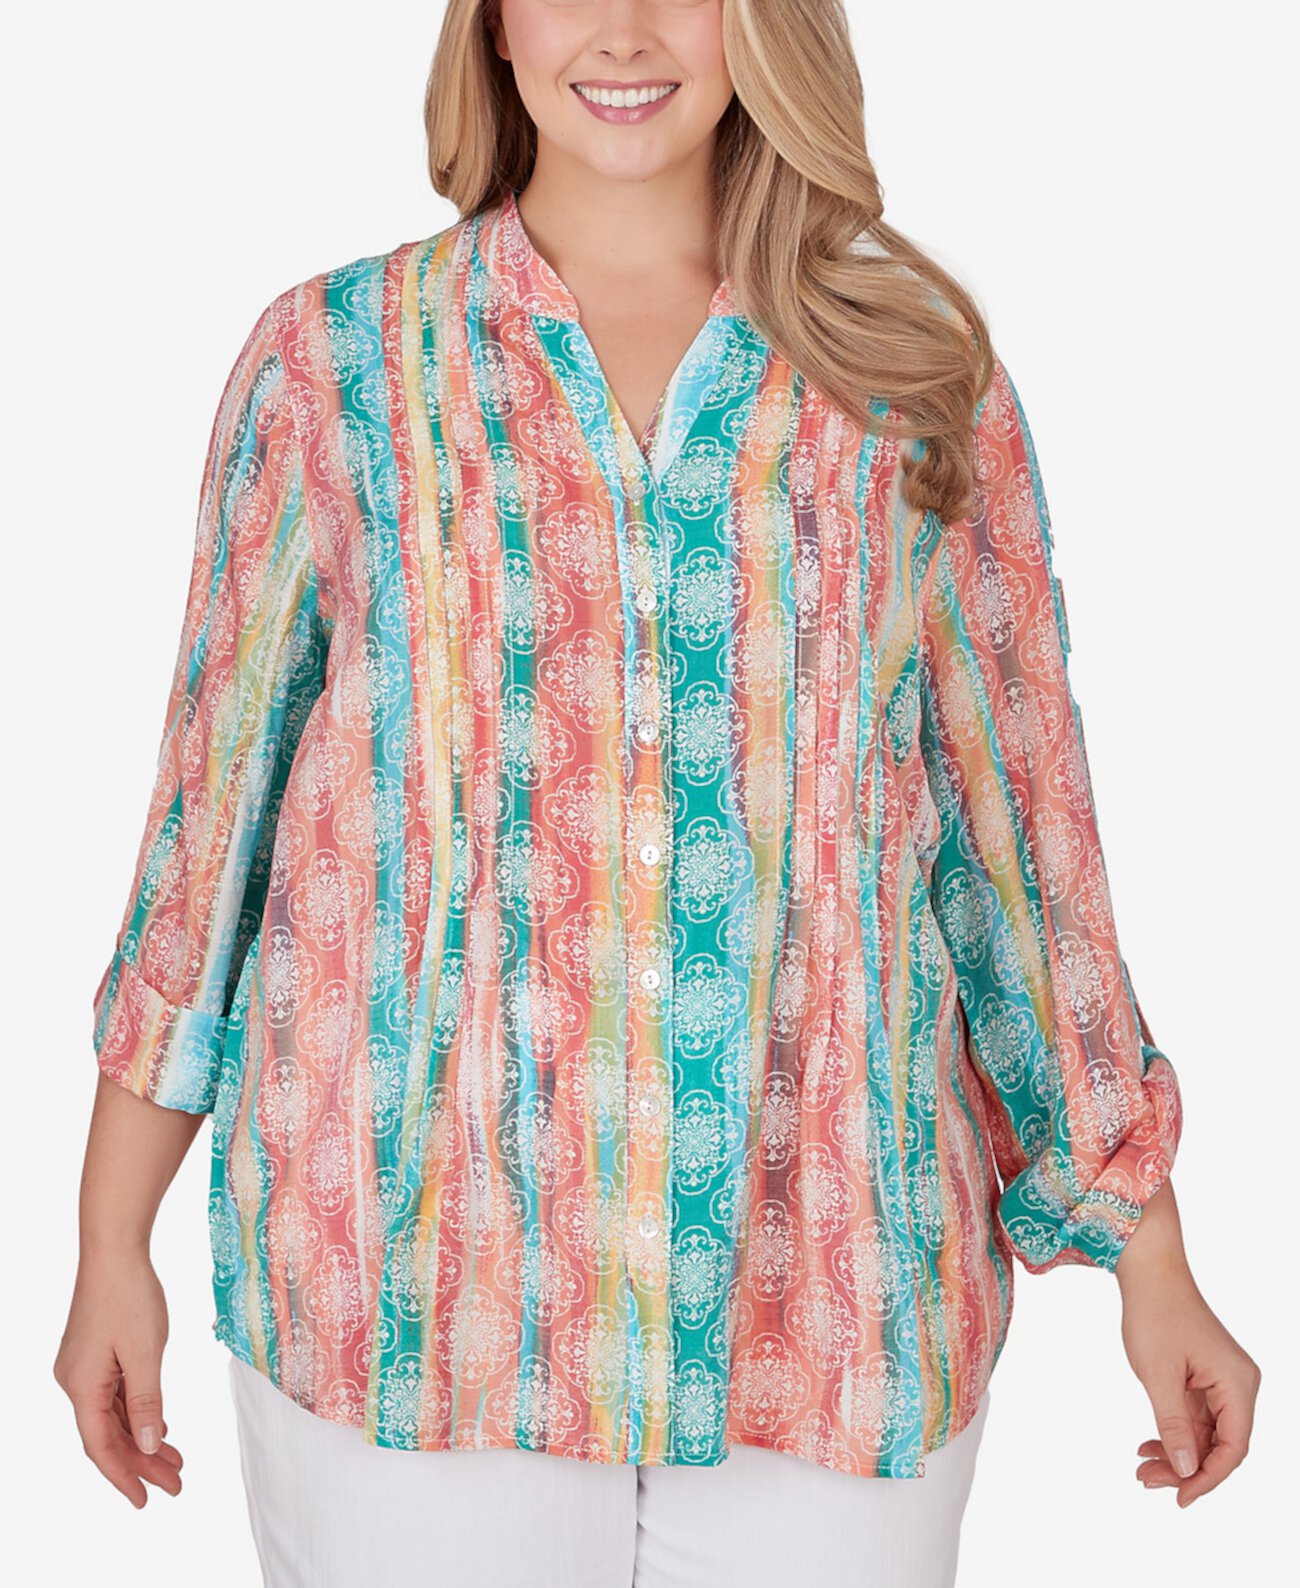 Plus Size Woven Silky Gauze Stripe Button Front Top Ruby Rd.